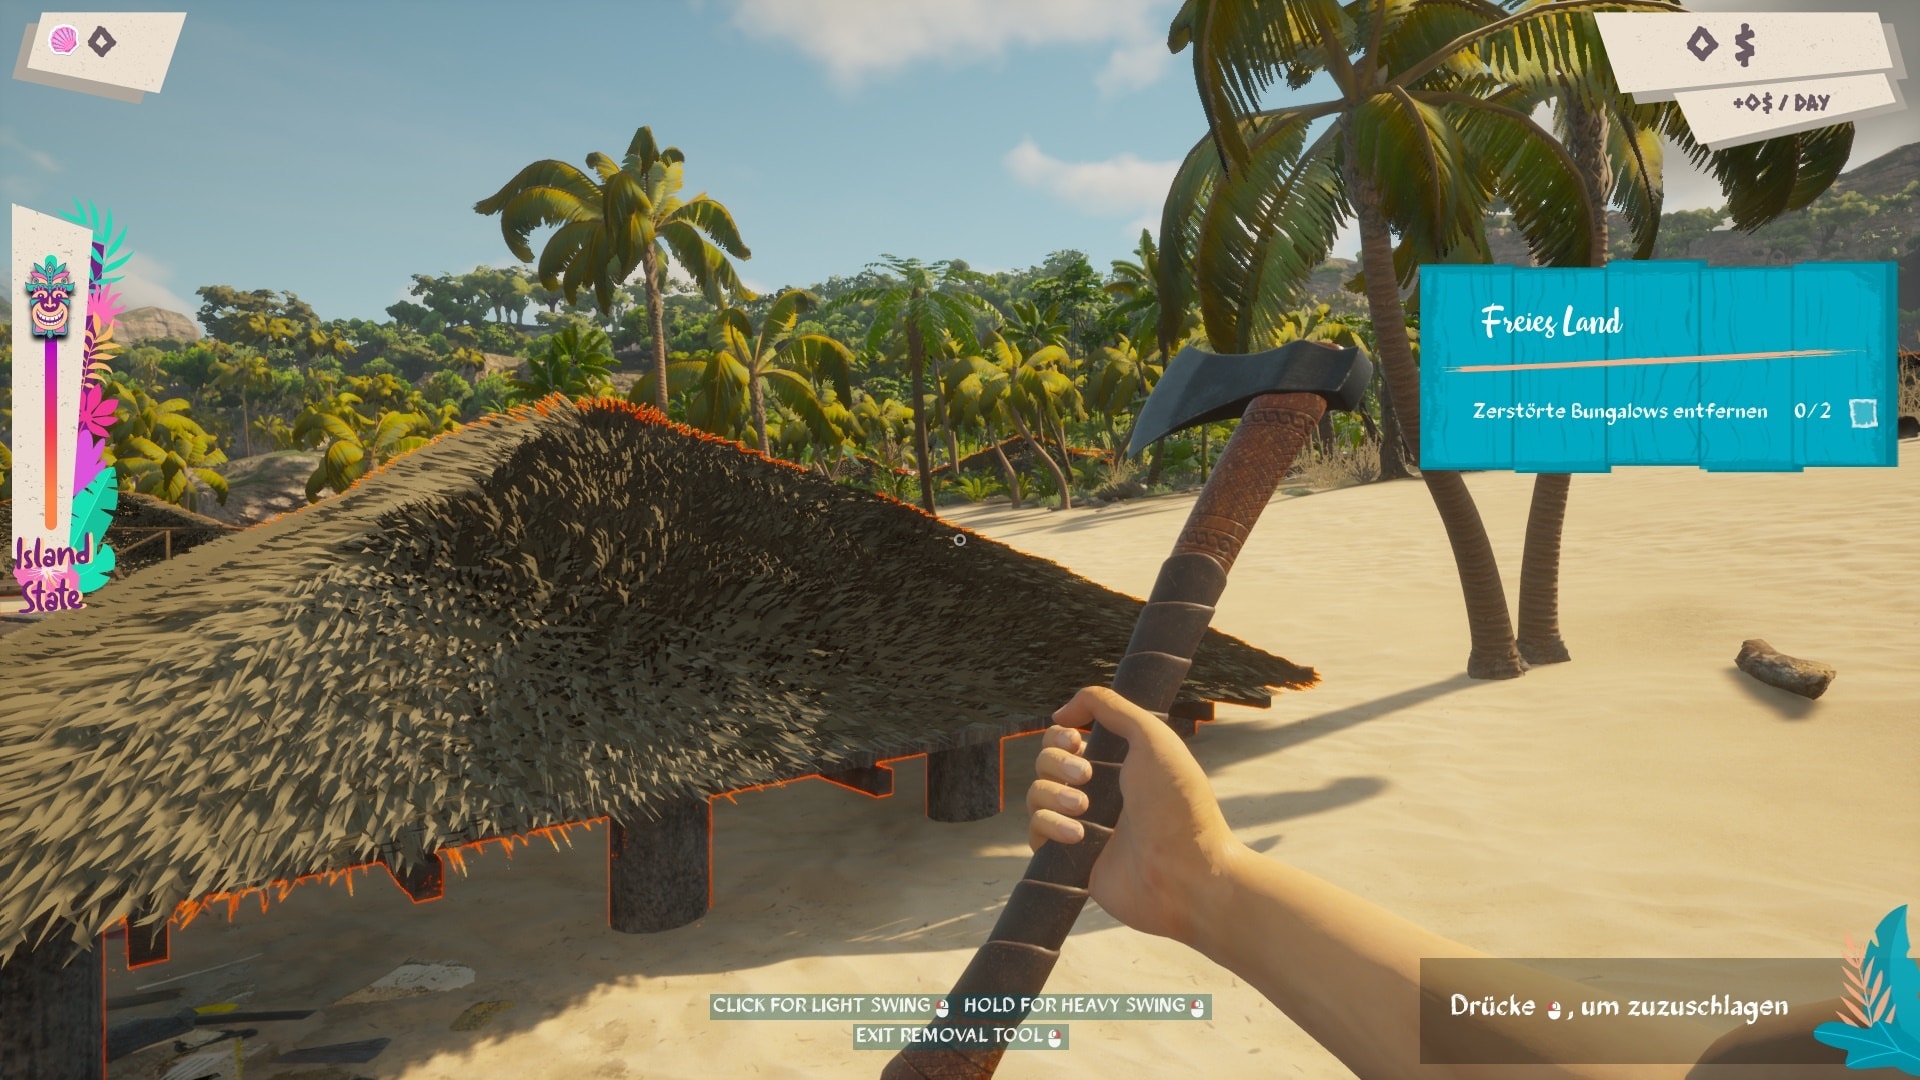 This axe has suddenly appeared in my hand. I guess Island Lady wants me to be armed.